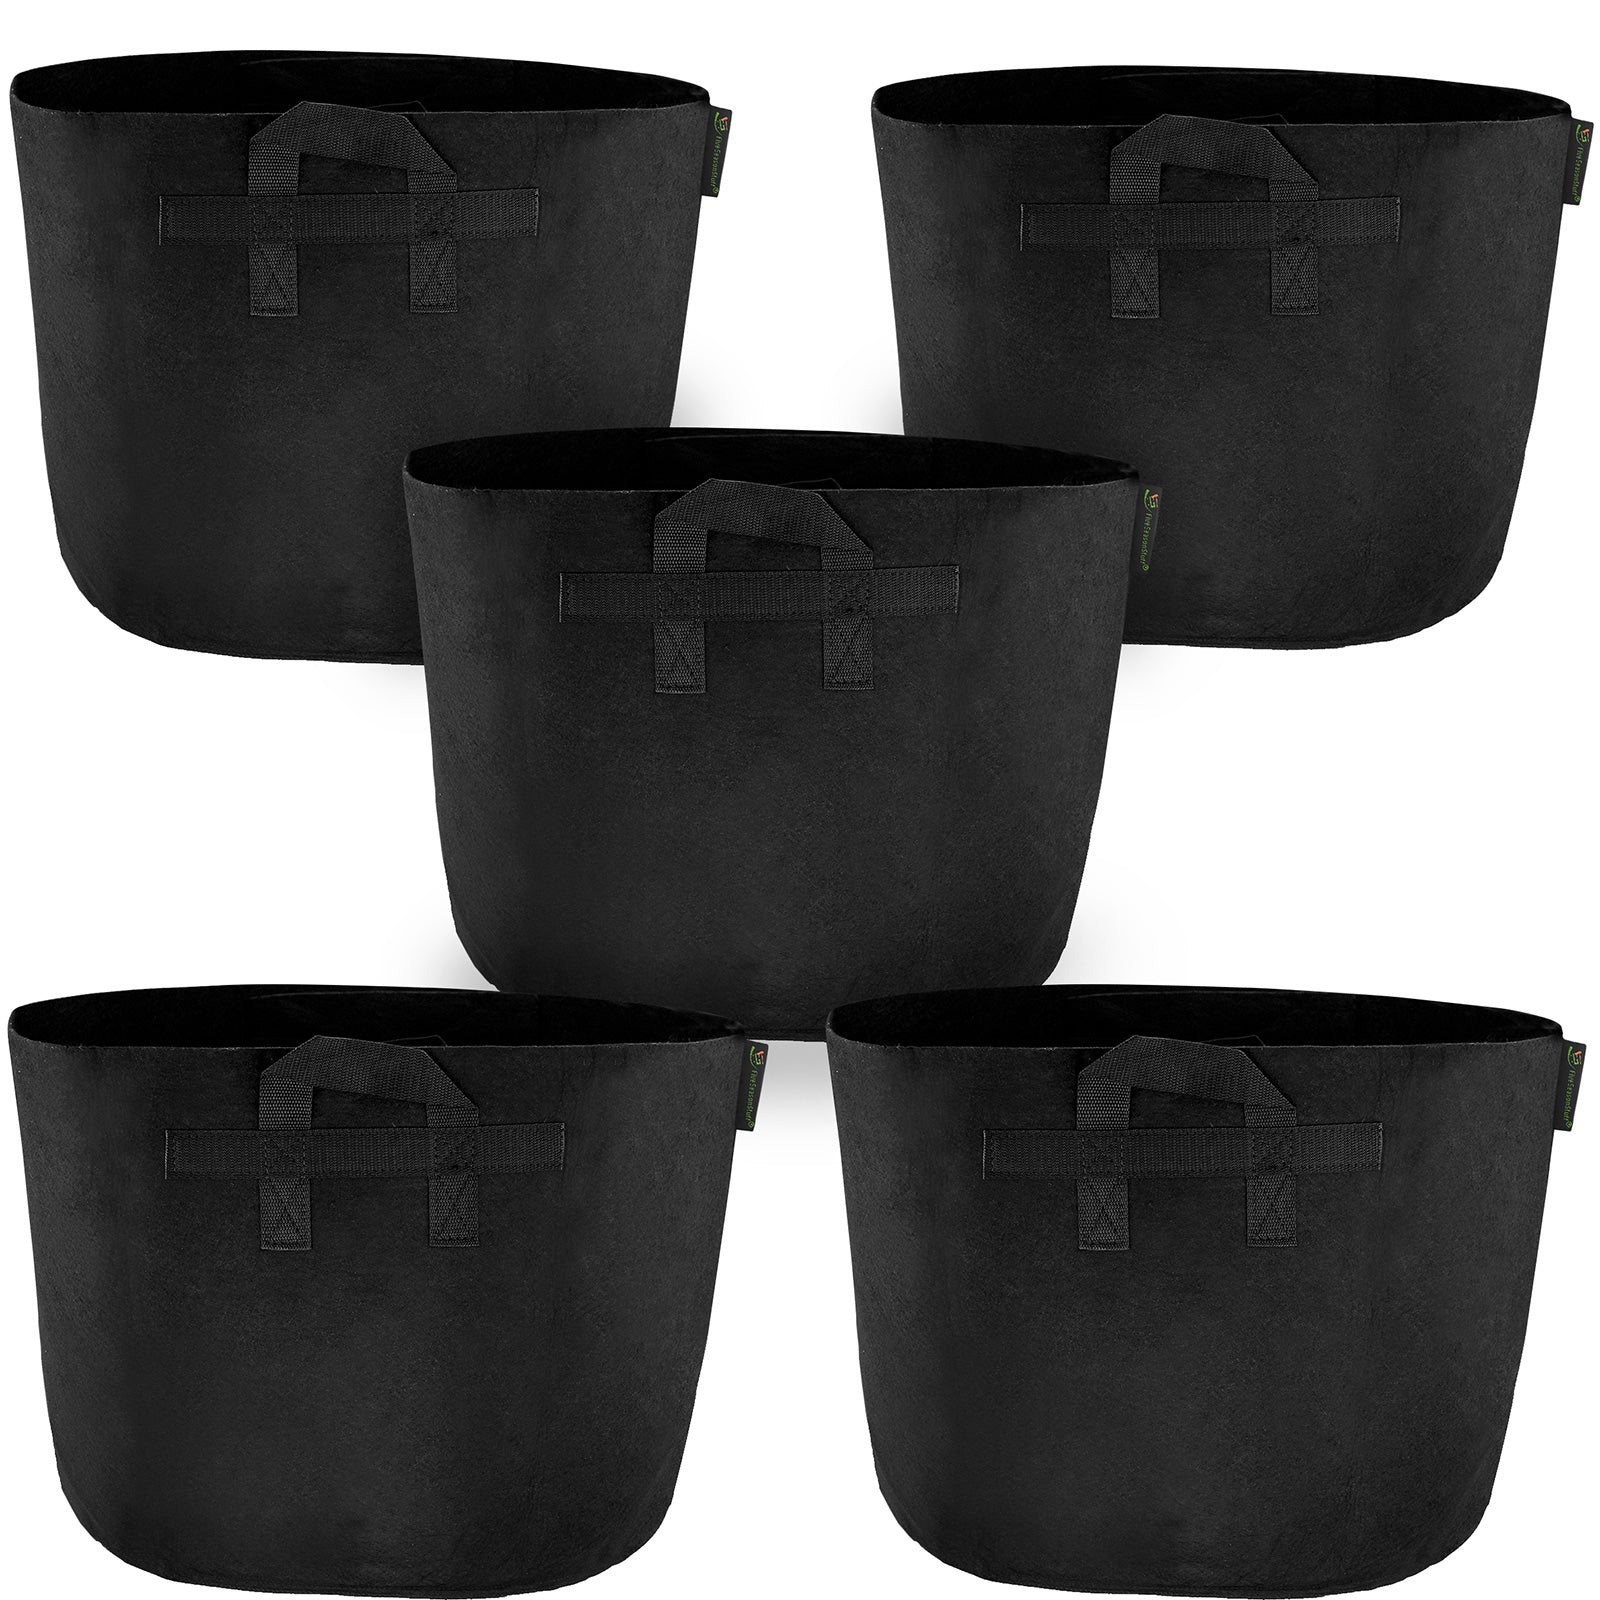 20 Gal. Grow Bag Thickened Nonwoven Fabric Pots Aeration Container with  Strap Handles Black with Green Stitch (5-Pack)